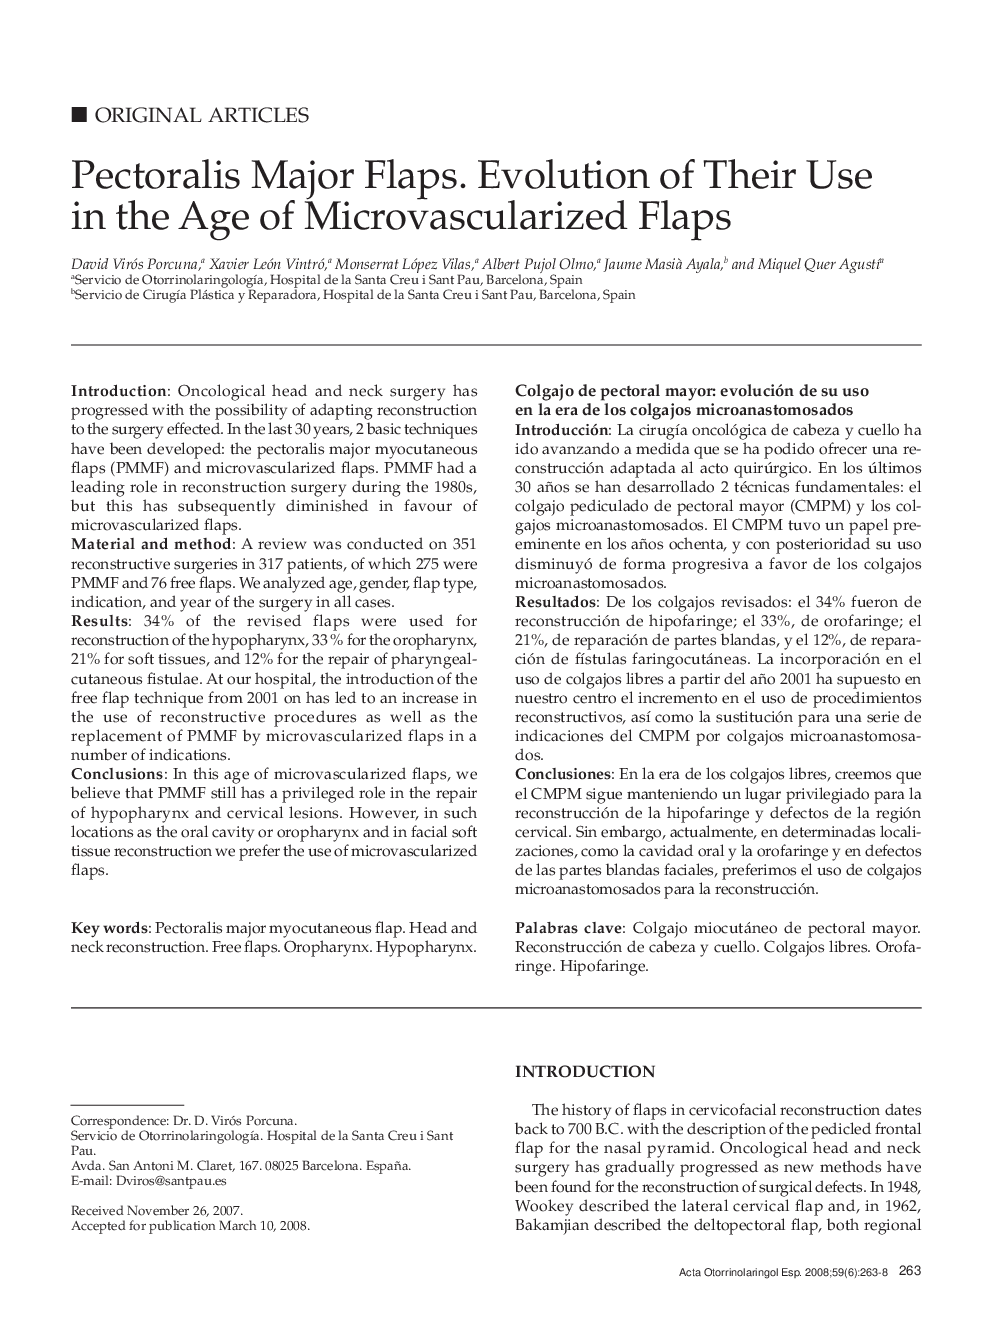 Pectoralis Major Flaps. Evolution of Their Use in the Age of Microvascularized Flaps